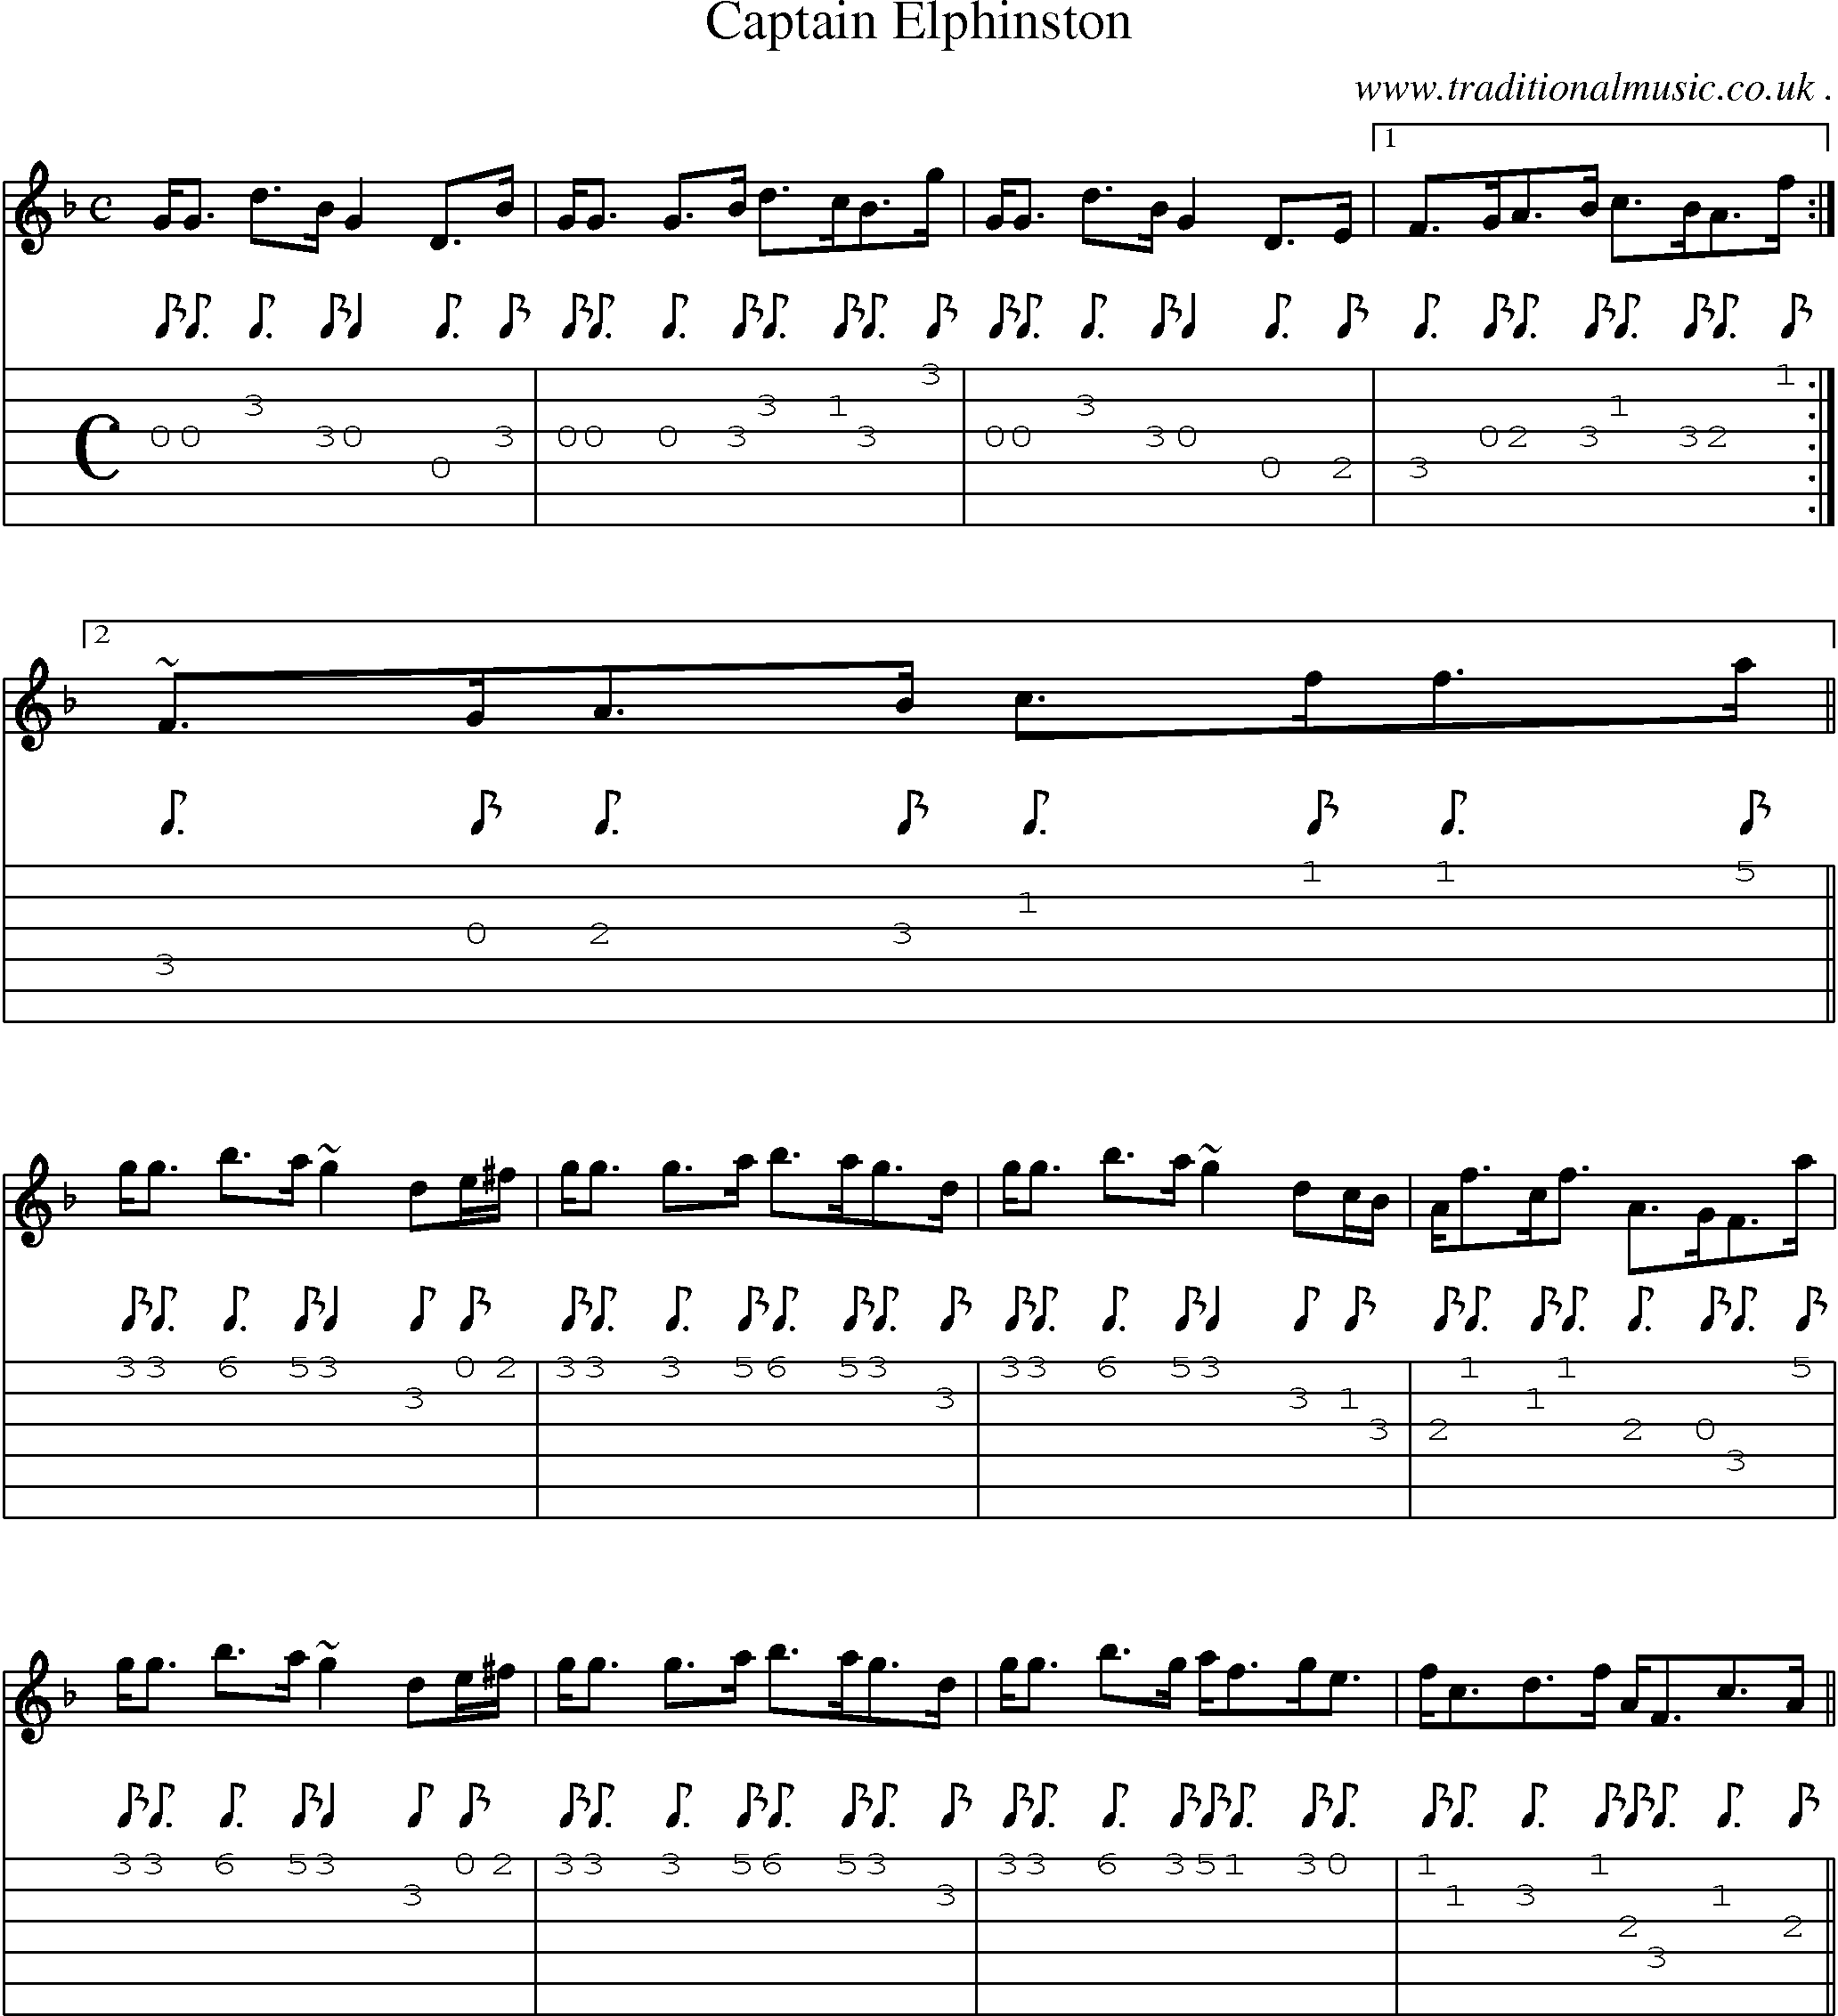 Sheet-music  score, Chords and Guitar Tabs for Captain Elphinston